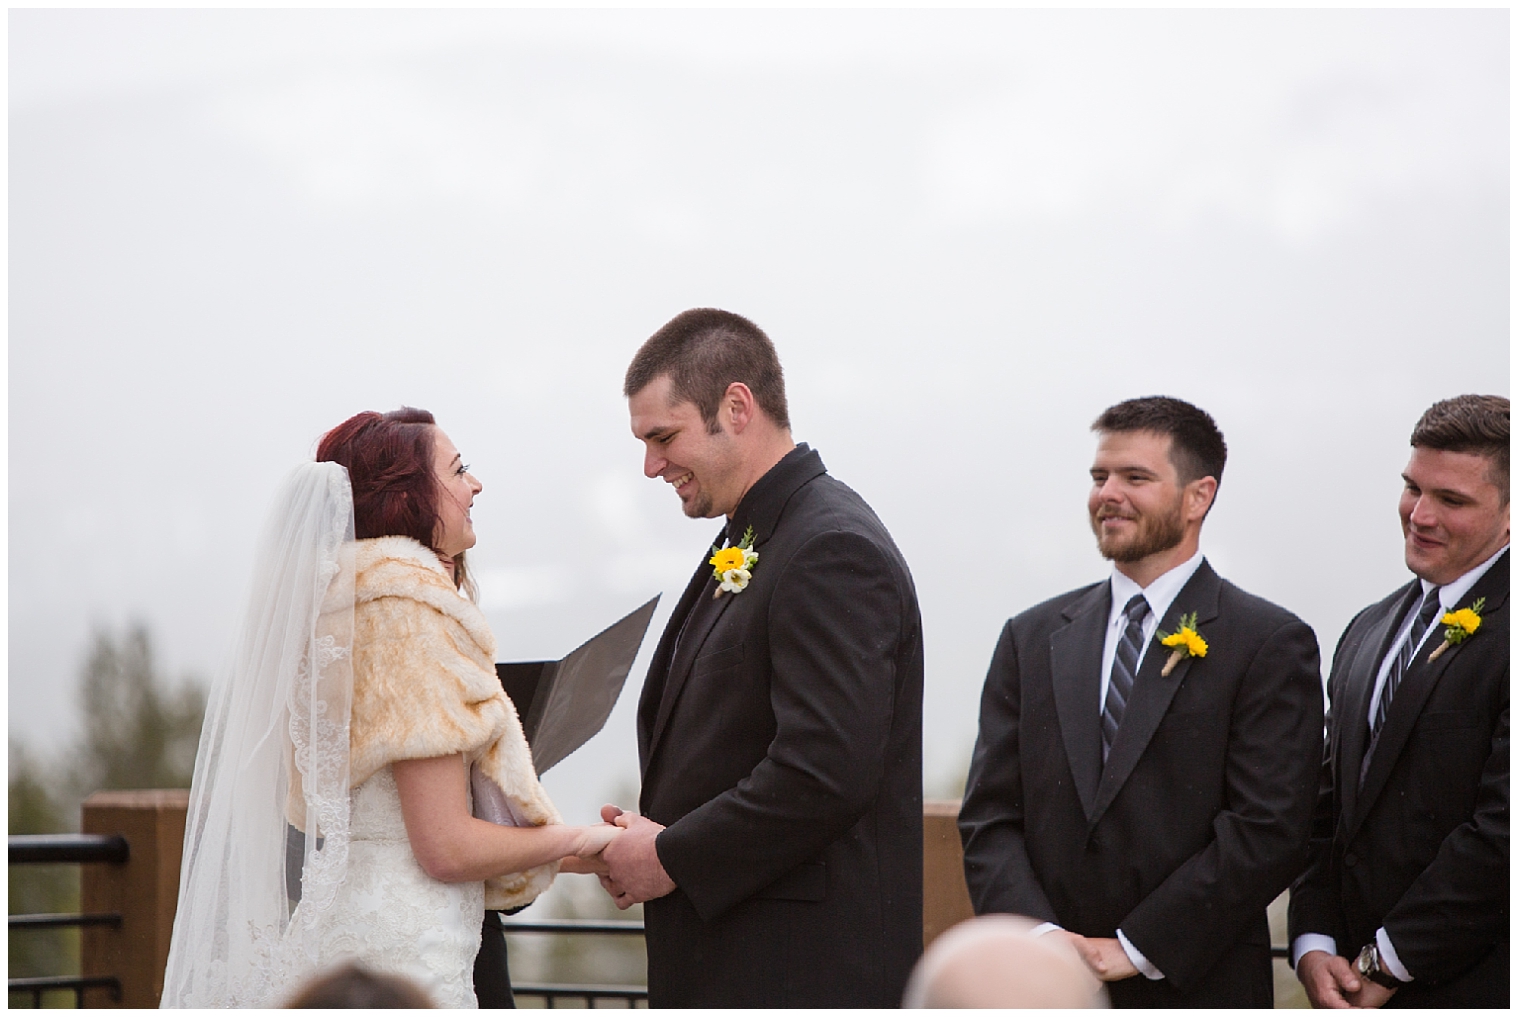 The wedding couple laugh together at the altar at their Colorado mountain wedding at Sevens.